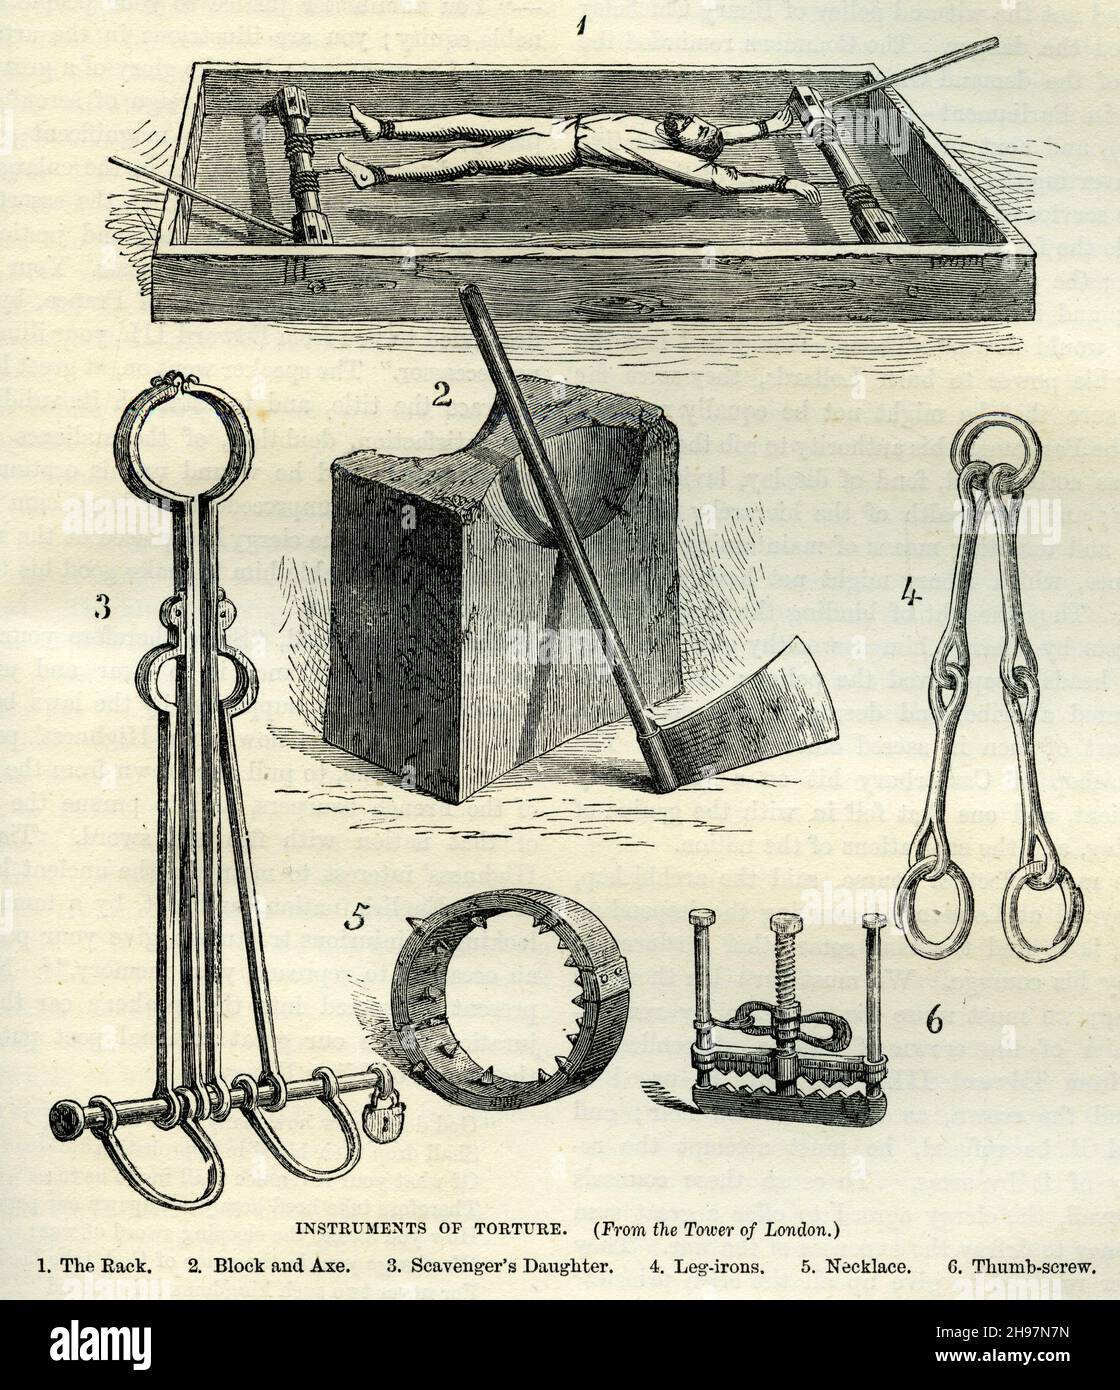 Engraving of various Instruments of torture used during the Reformation by Catholics and Protestants alike Stock Photo